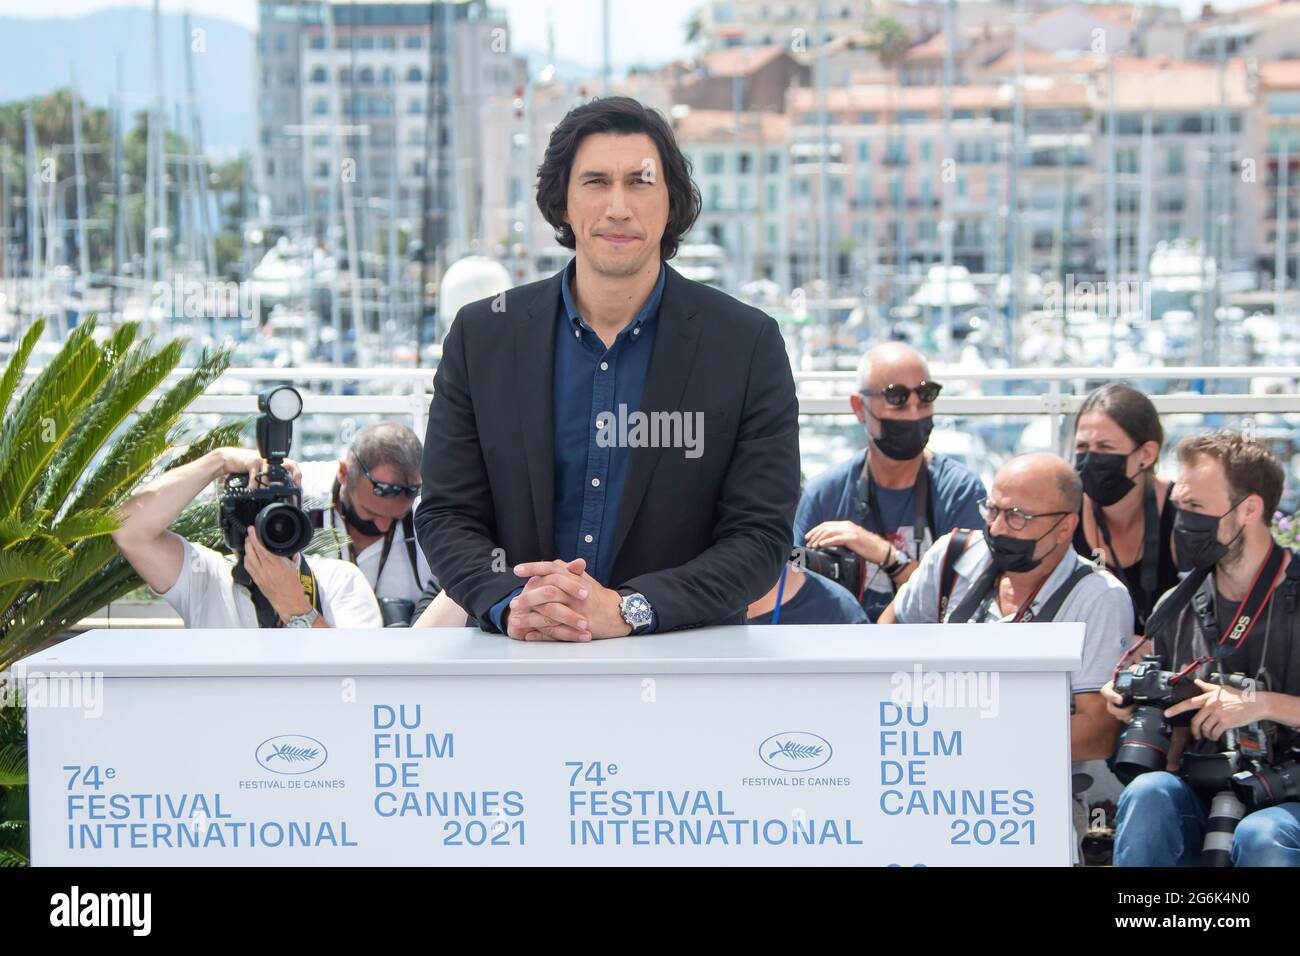 Cannes, France. 06th July, 2021. Adam Driver attends the "Annette" photocall during the 74th annual Cannes Film Festival on July 06, 2021 in Cannes, France. Credit: Imagespace/Alamy Live News Stock Photo